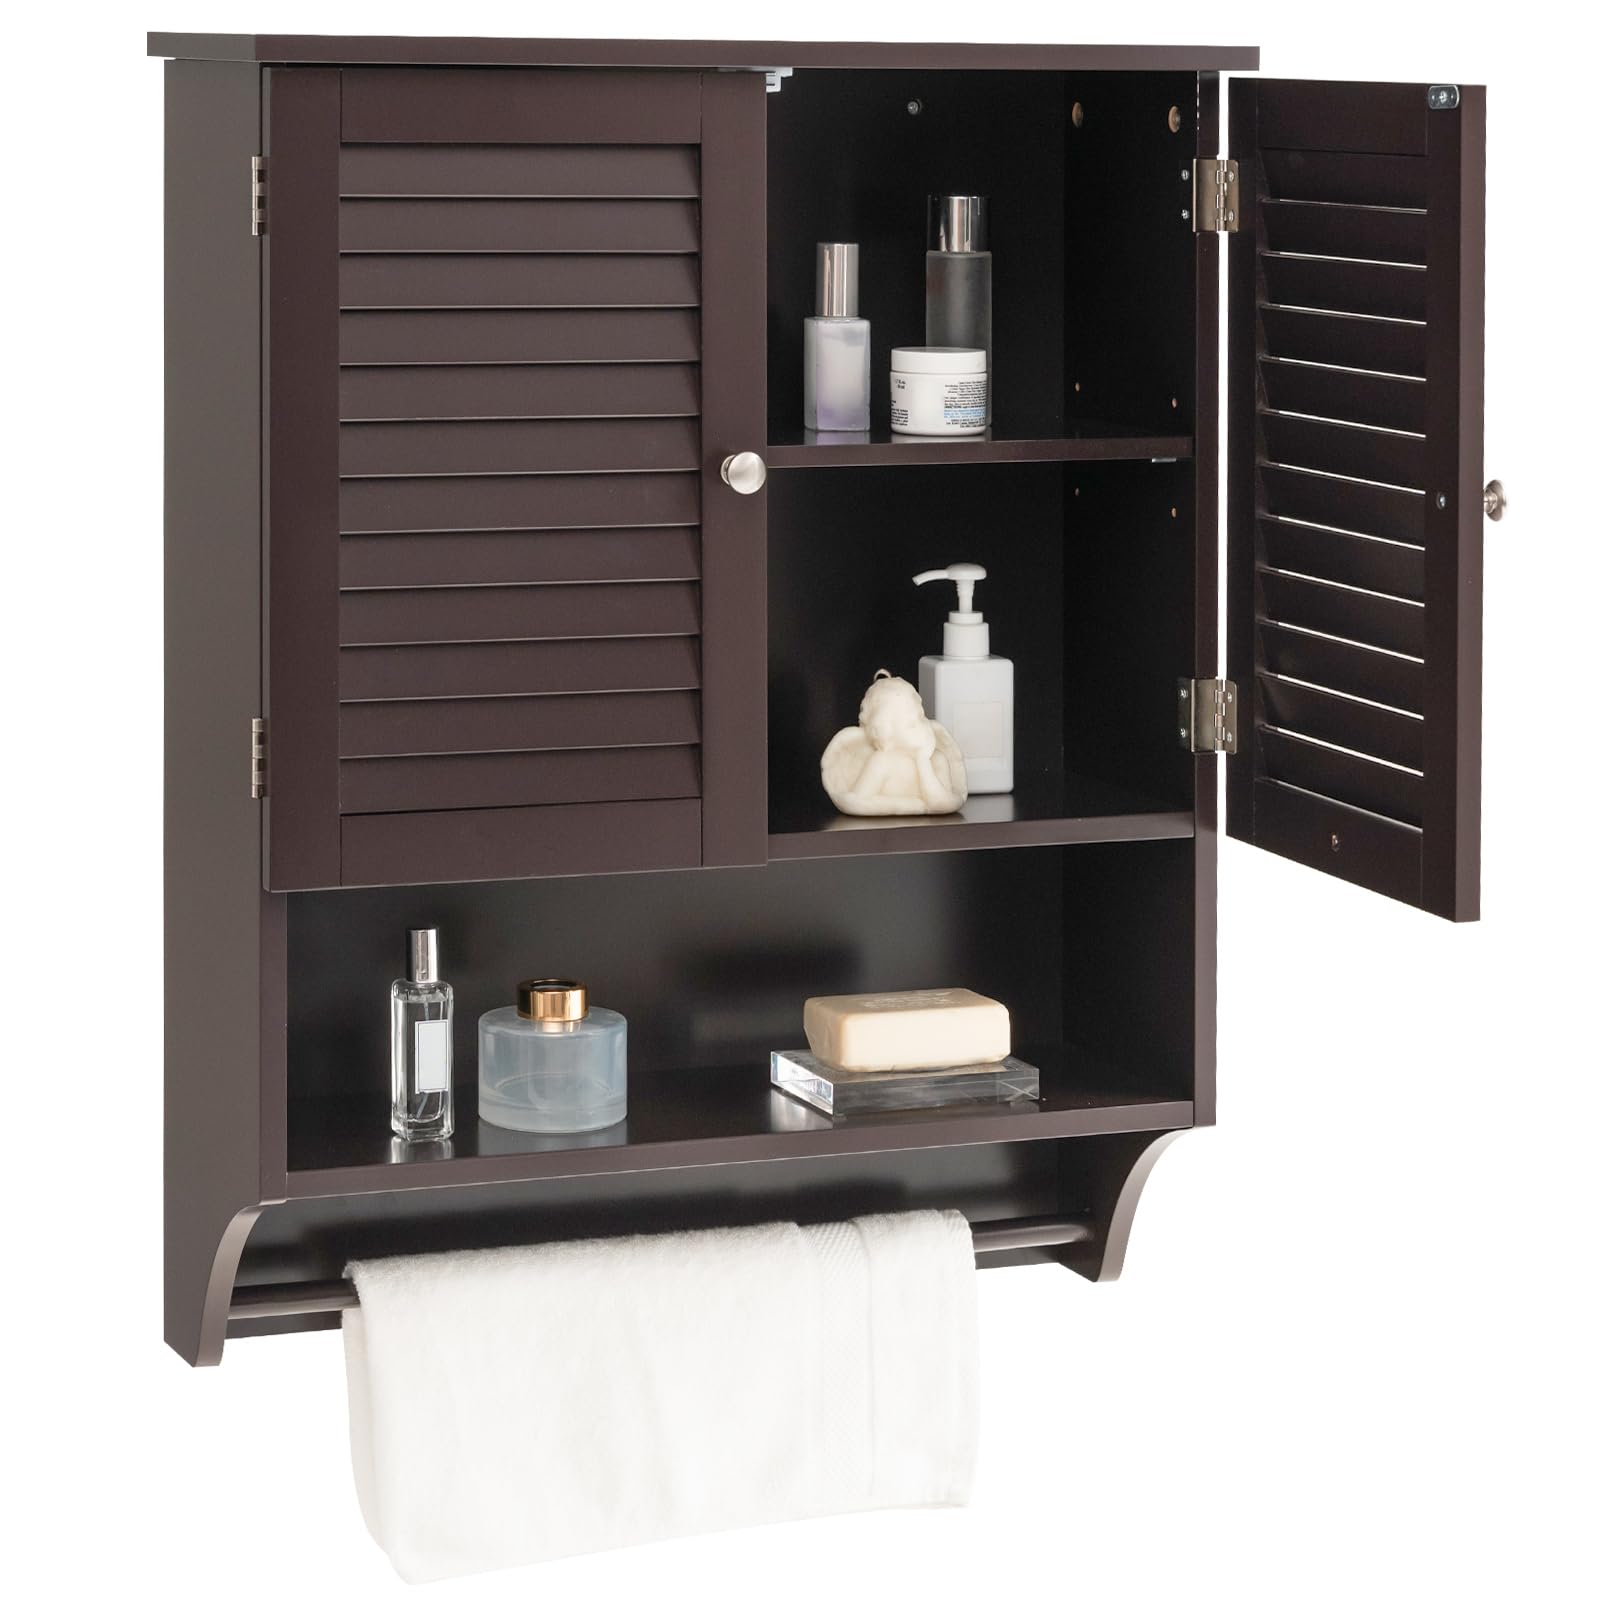 LOKO Bathroom Medicine Cabinet, Storage Cabinet with Double Louvered Doors, Wall Mounted Cabinet with Open Shelf & Towel Bar, Over The Toilet Space Saver Cabinet for Living Room Kitchen (Espresso)